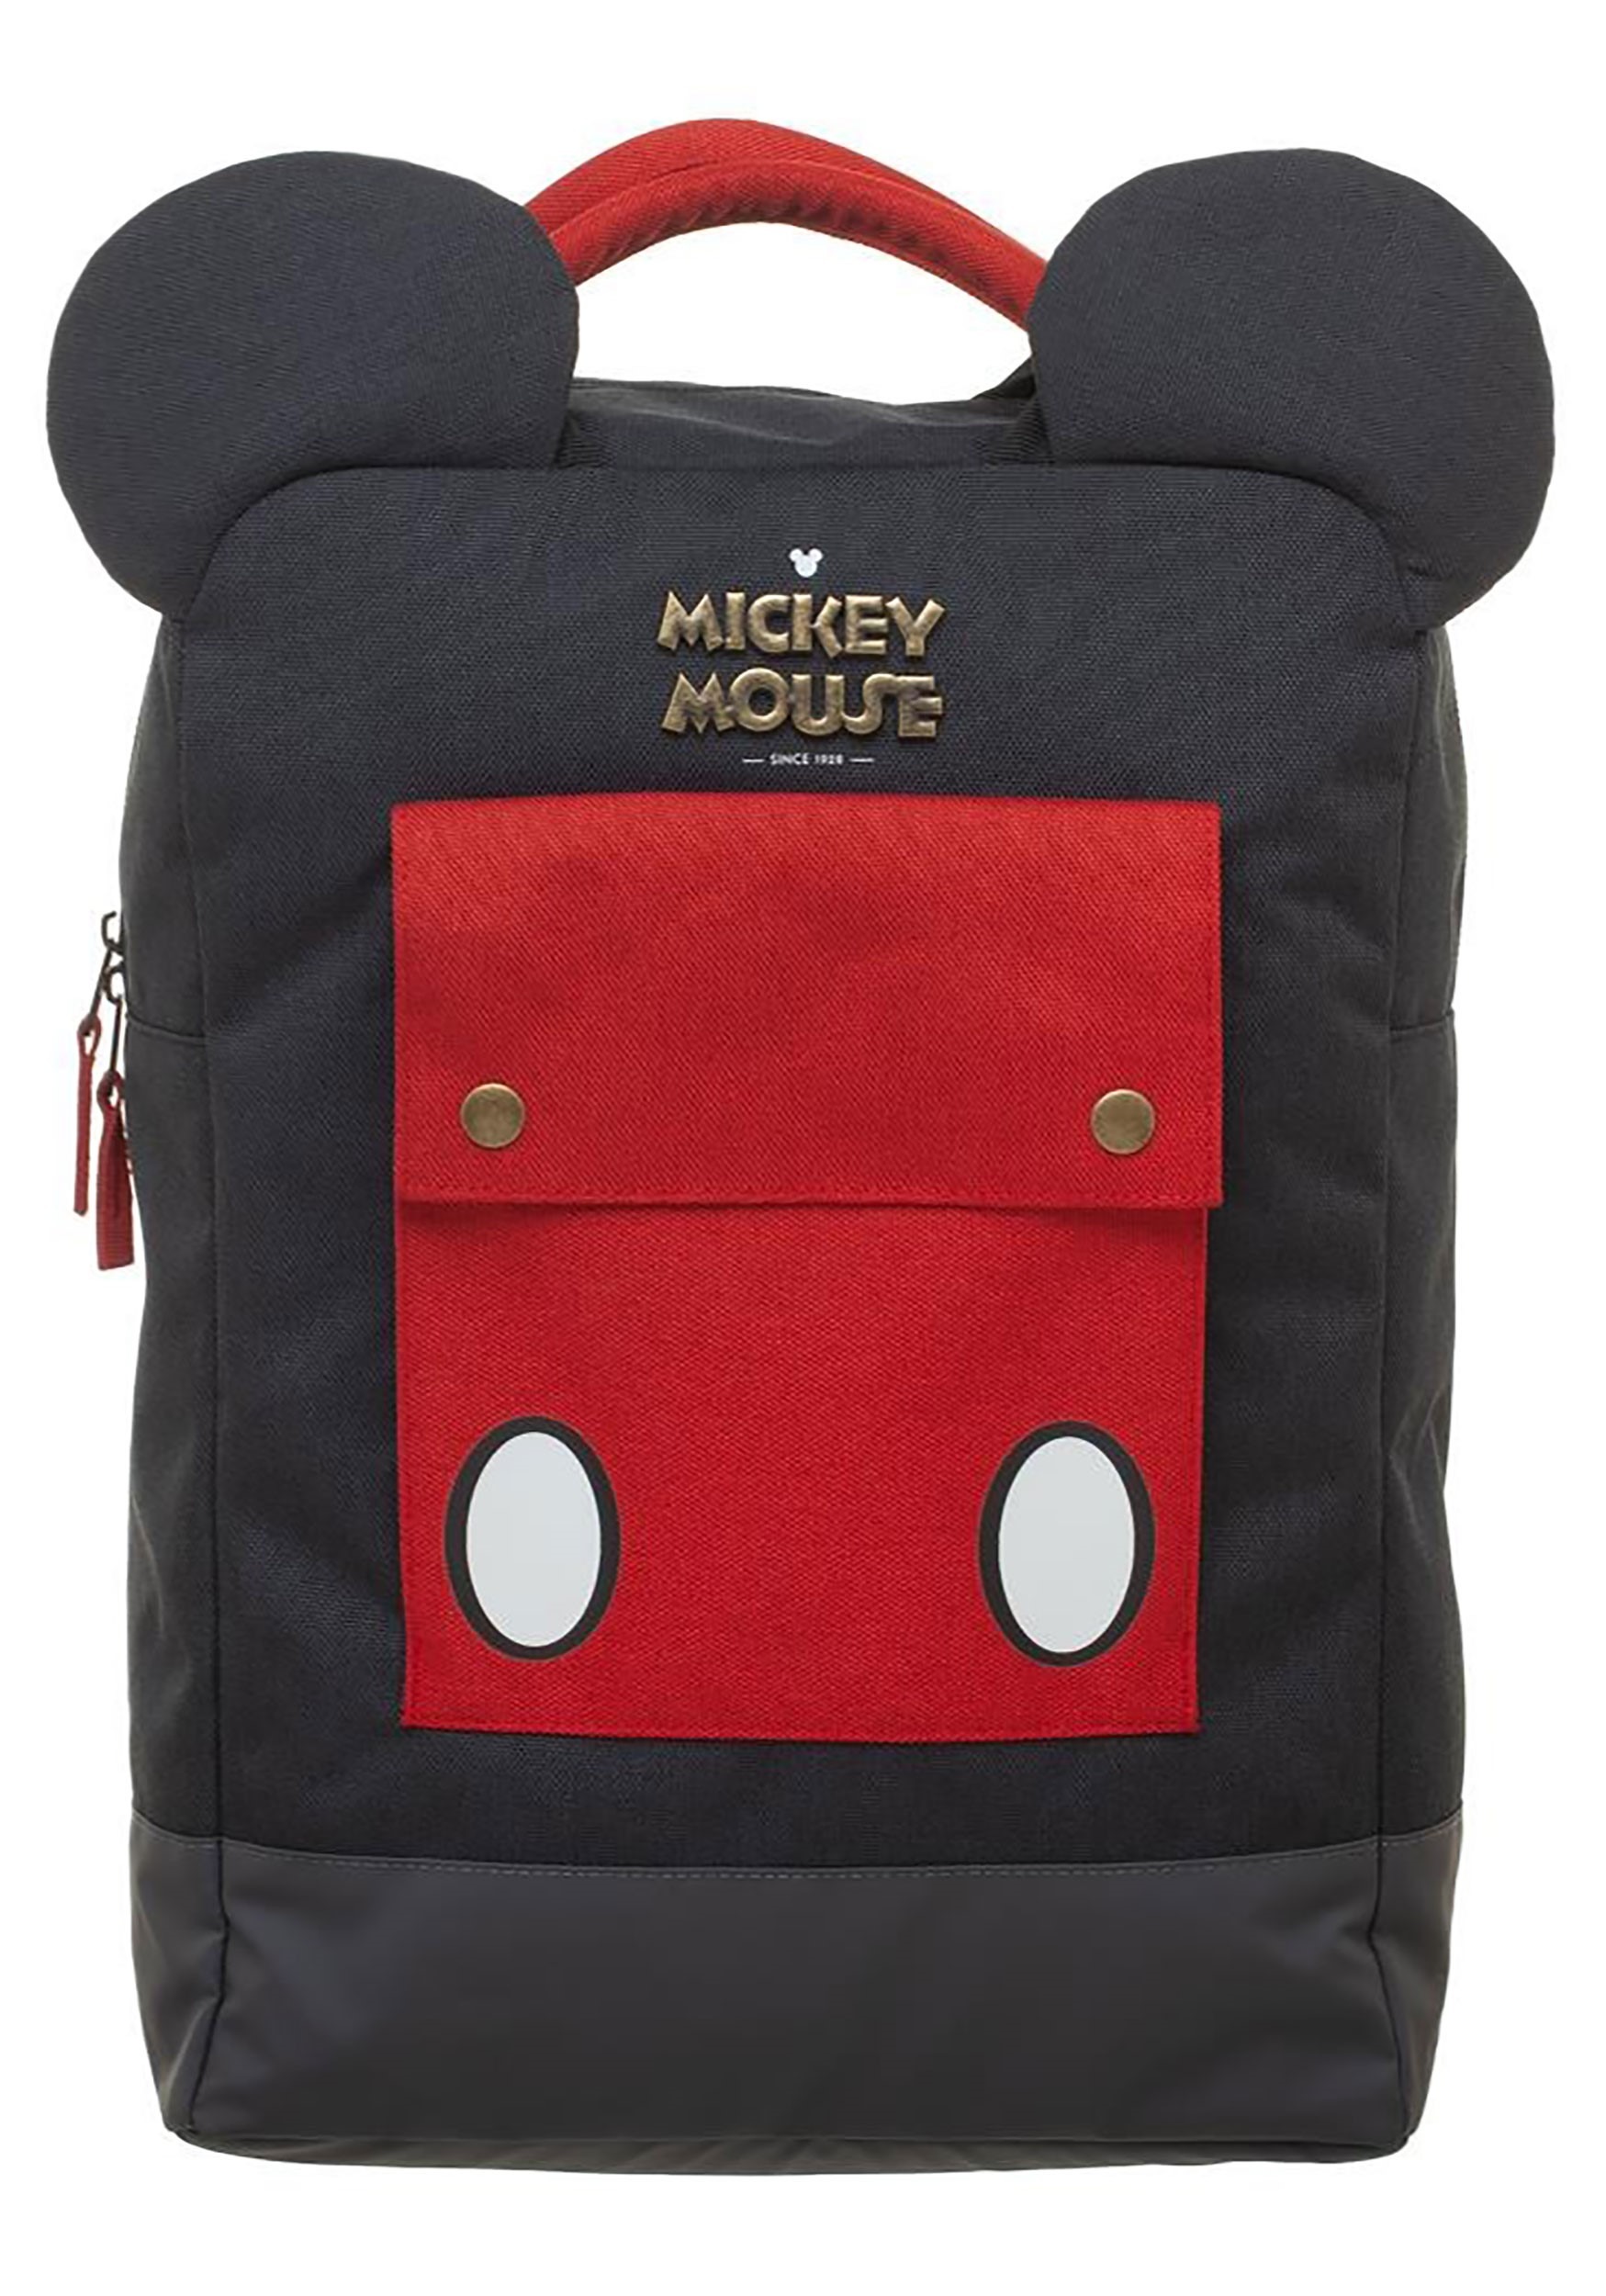 3D Ear Backpack Mickey Mouse